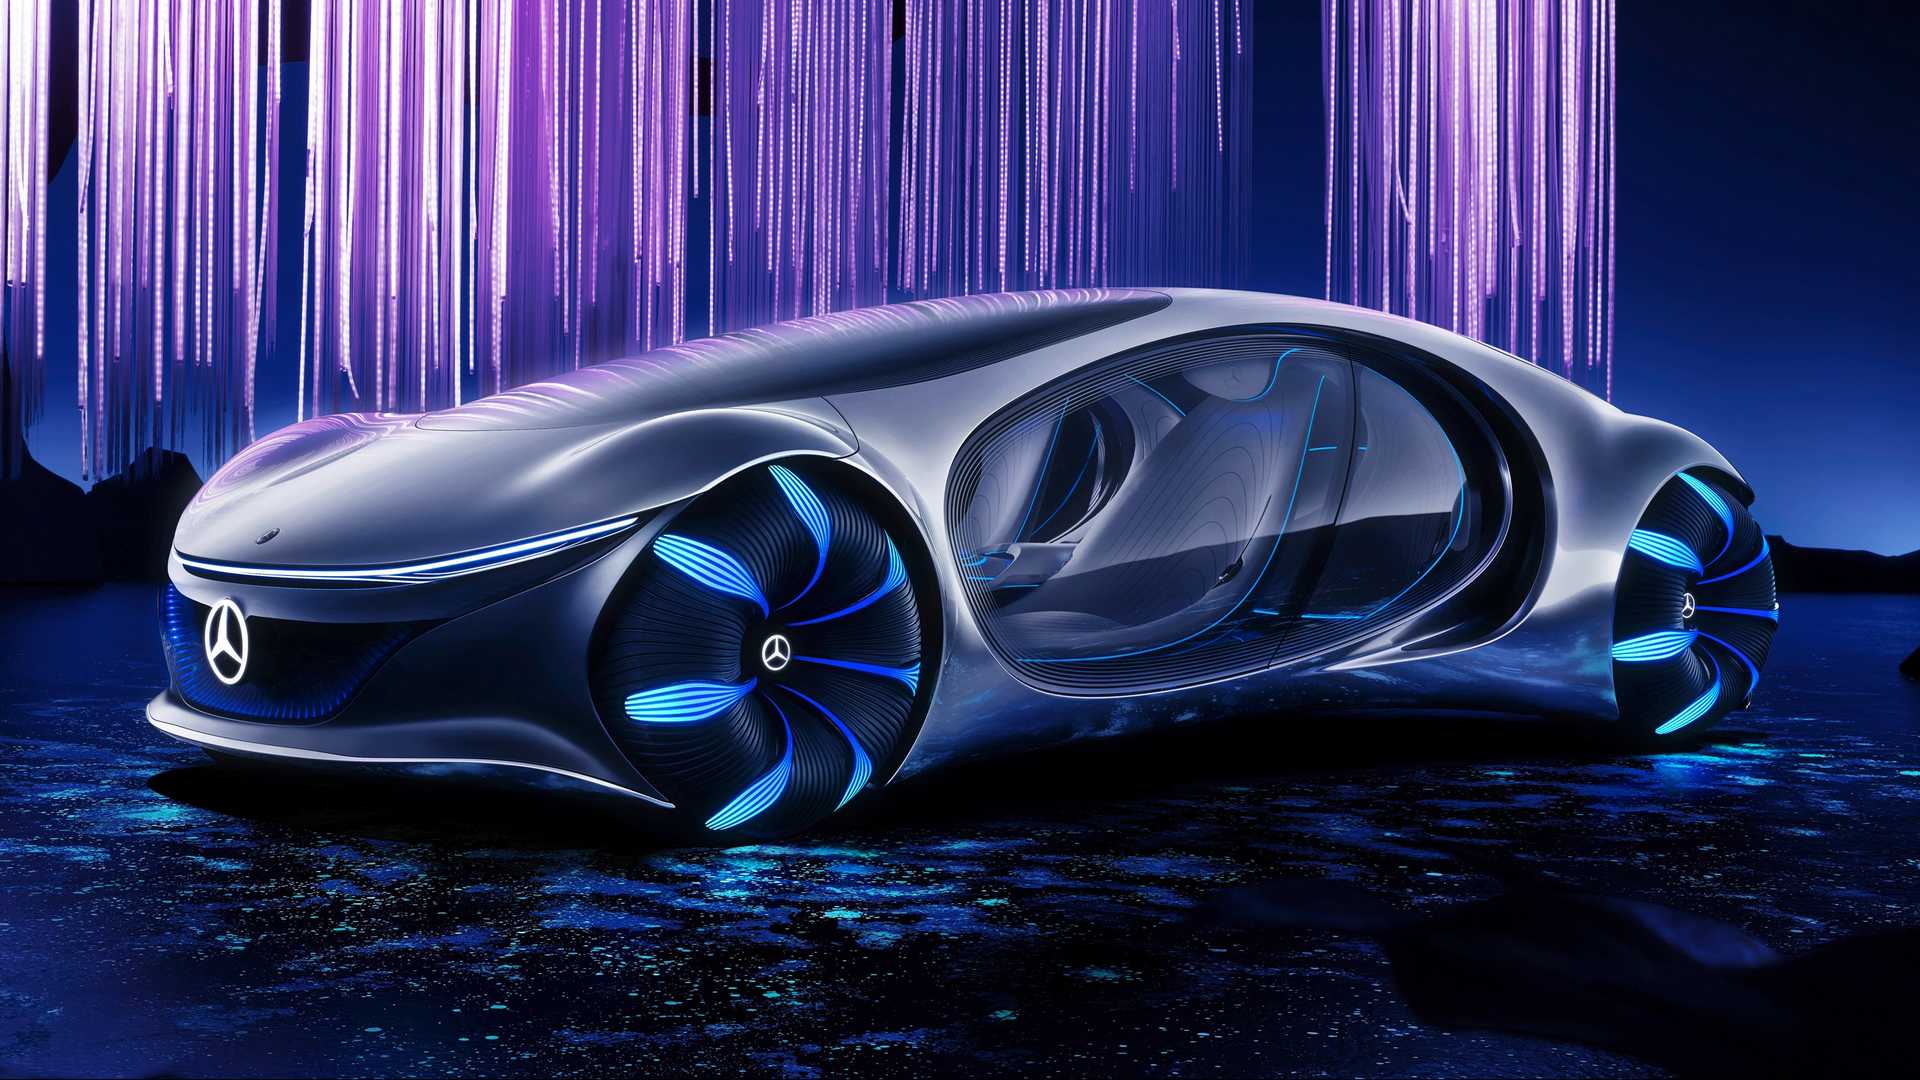 Mercedes Benz Vision AVTR Is A Daring, Futuristic Rolling Movie Promo